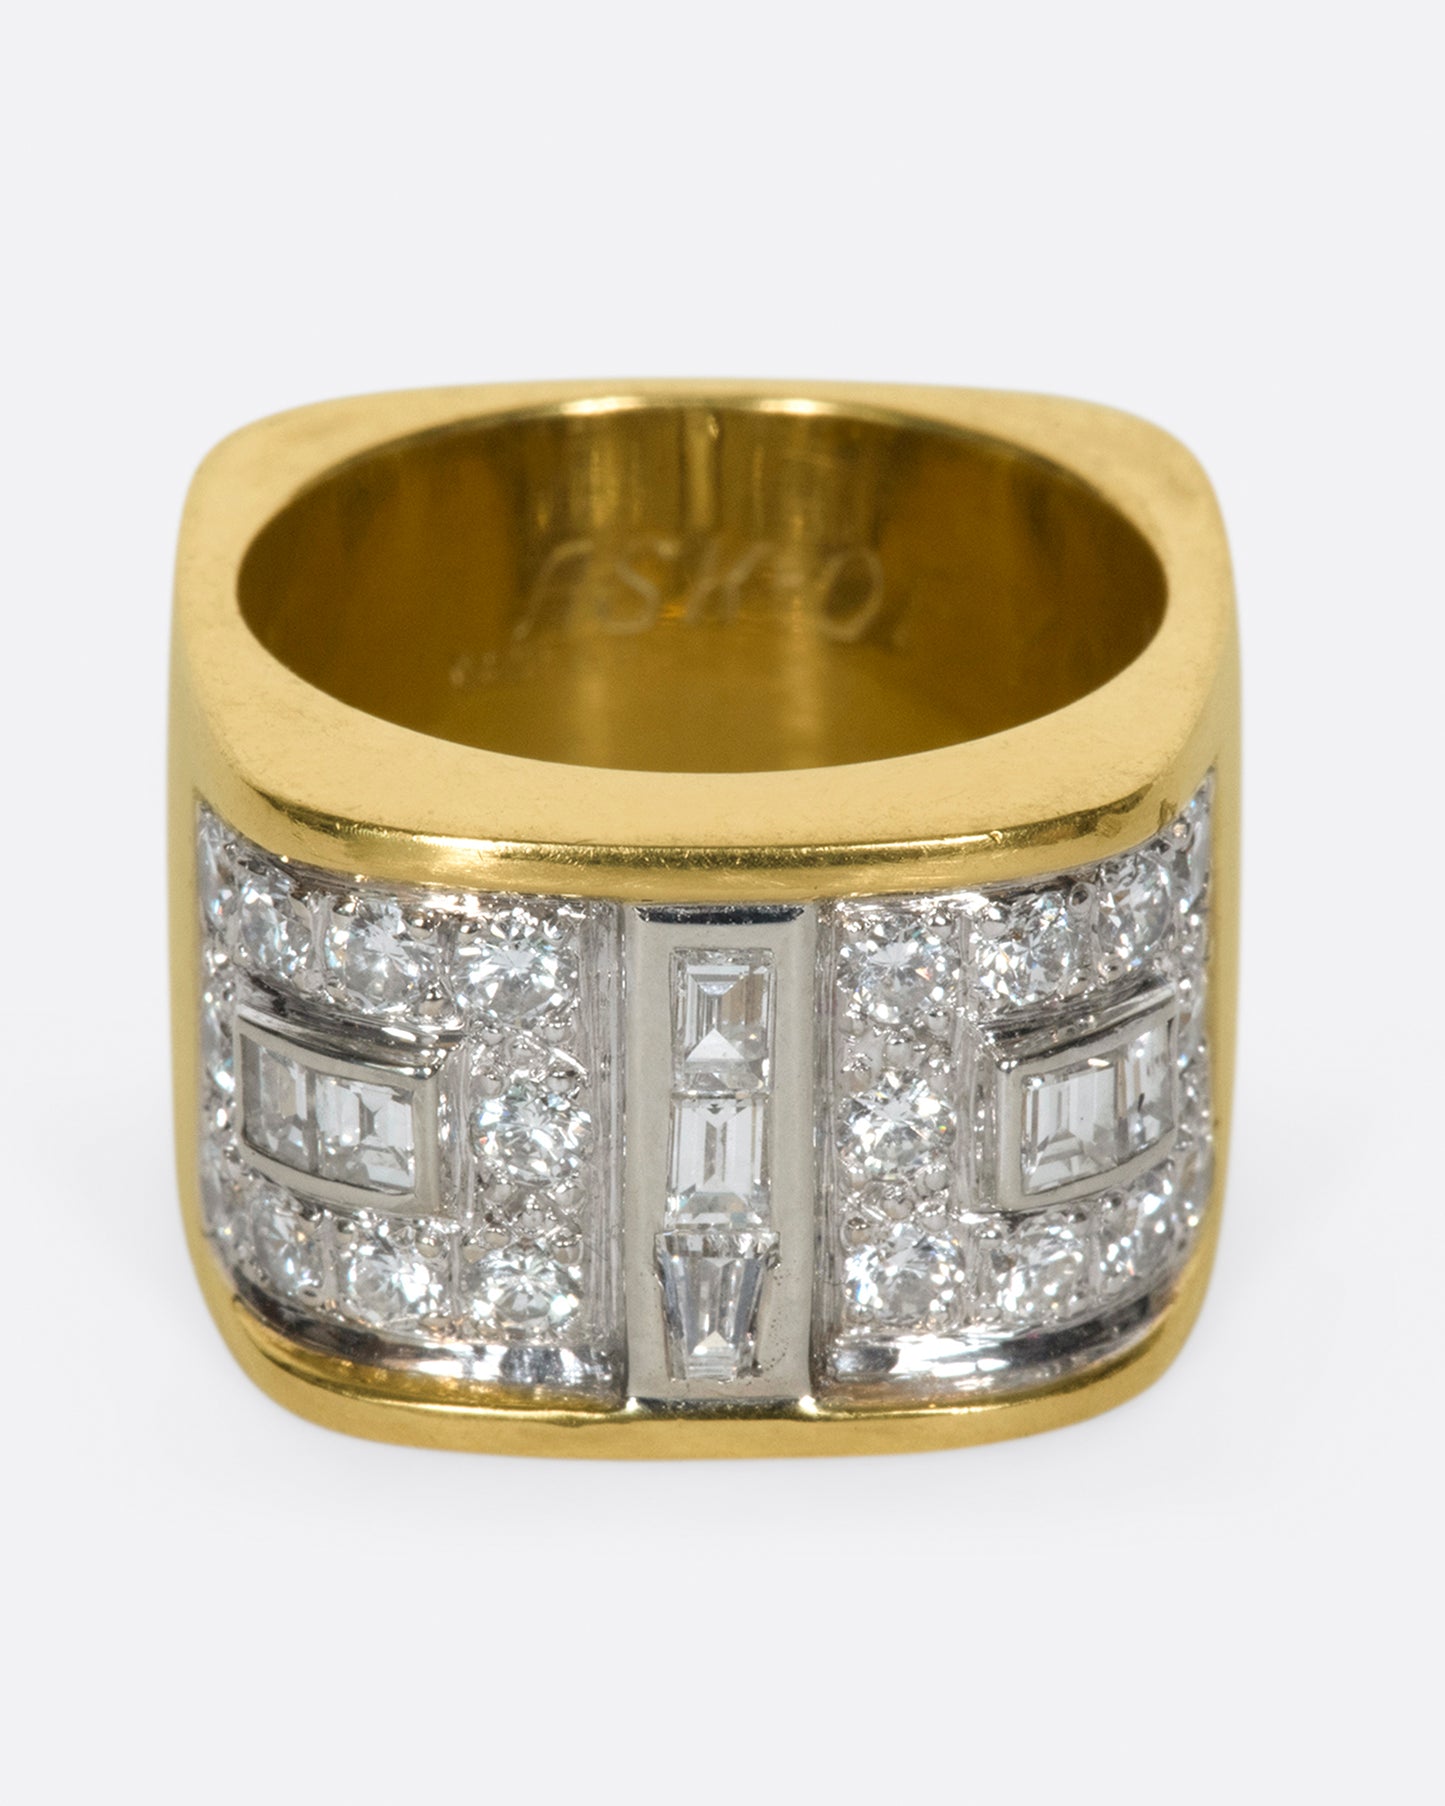 A square gold ring with a mosaic of baguette and round diamonds.